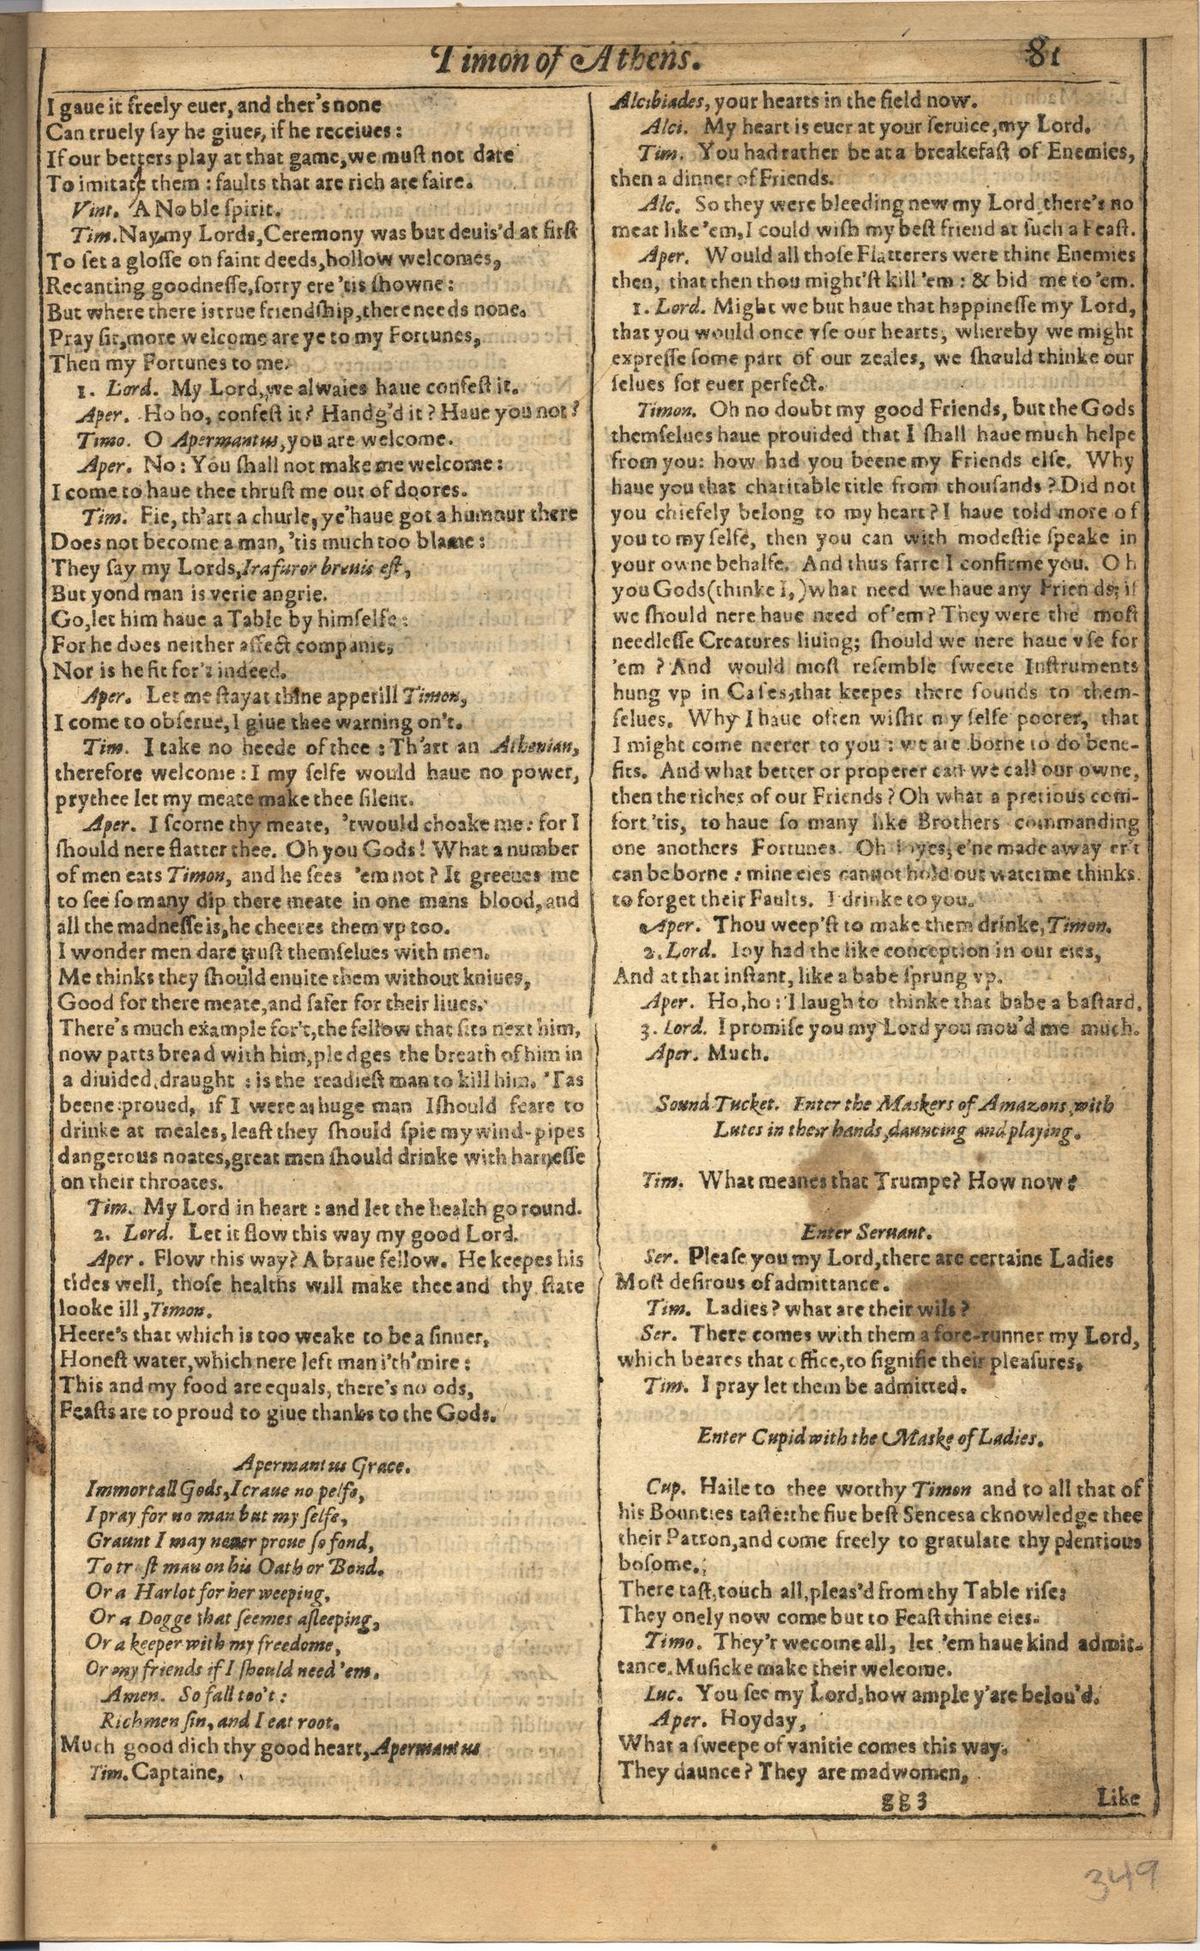 Image of page 697